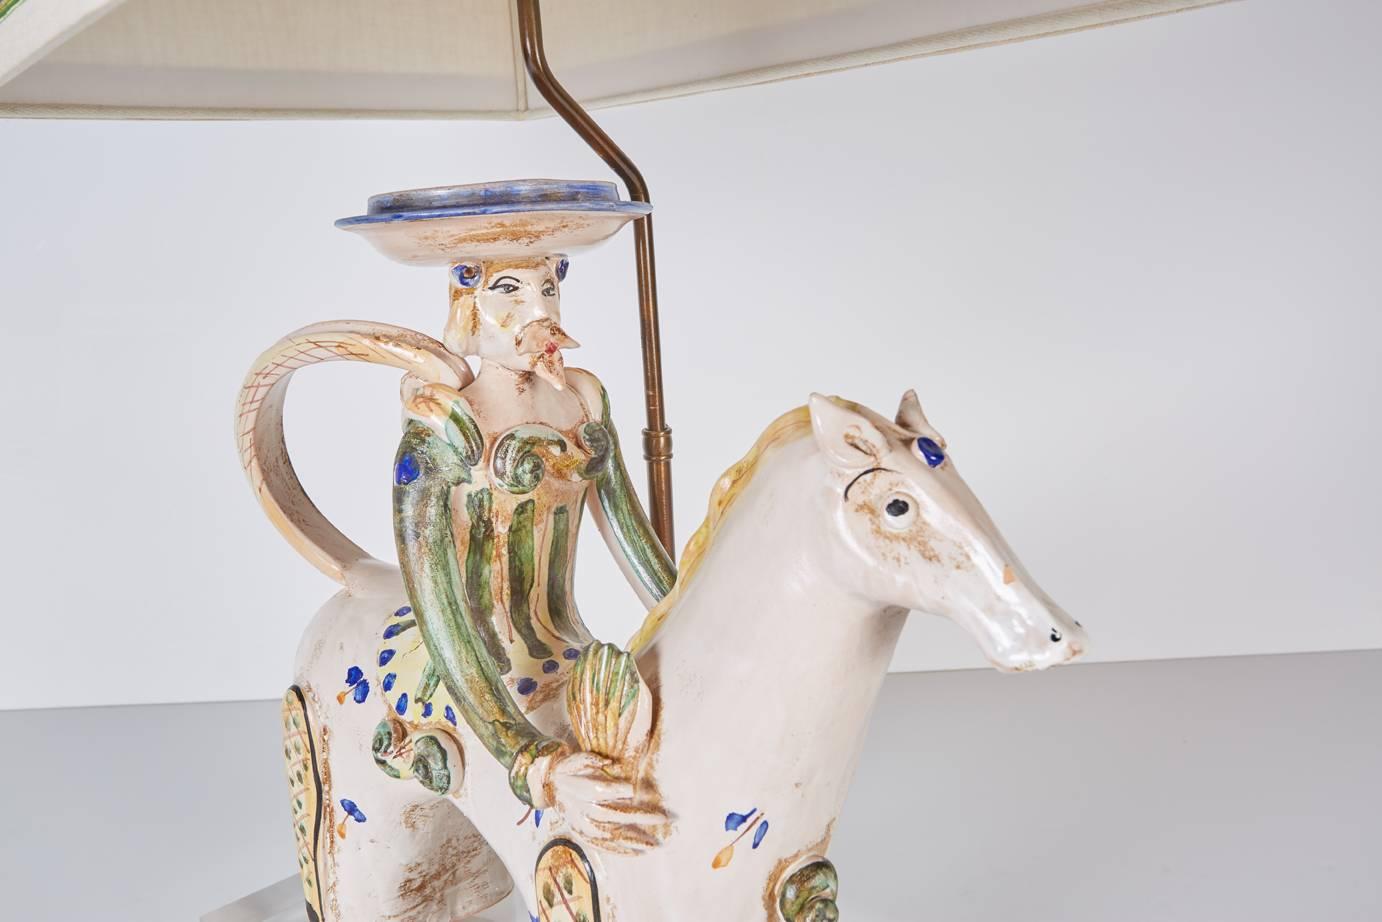 Italian Mid-Century Modern ceramic horse with rider mounted as a lamp on a custom Lucite base and with a custom shade in natural linen trimmed in blue ribbon and silver cord.